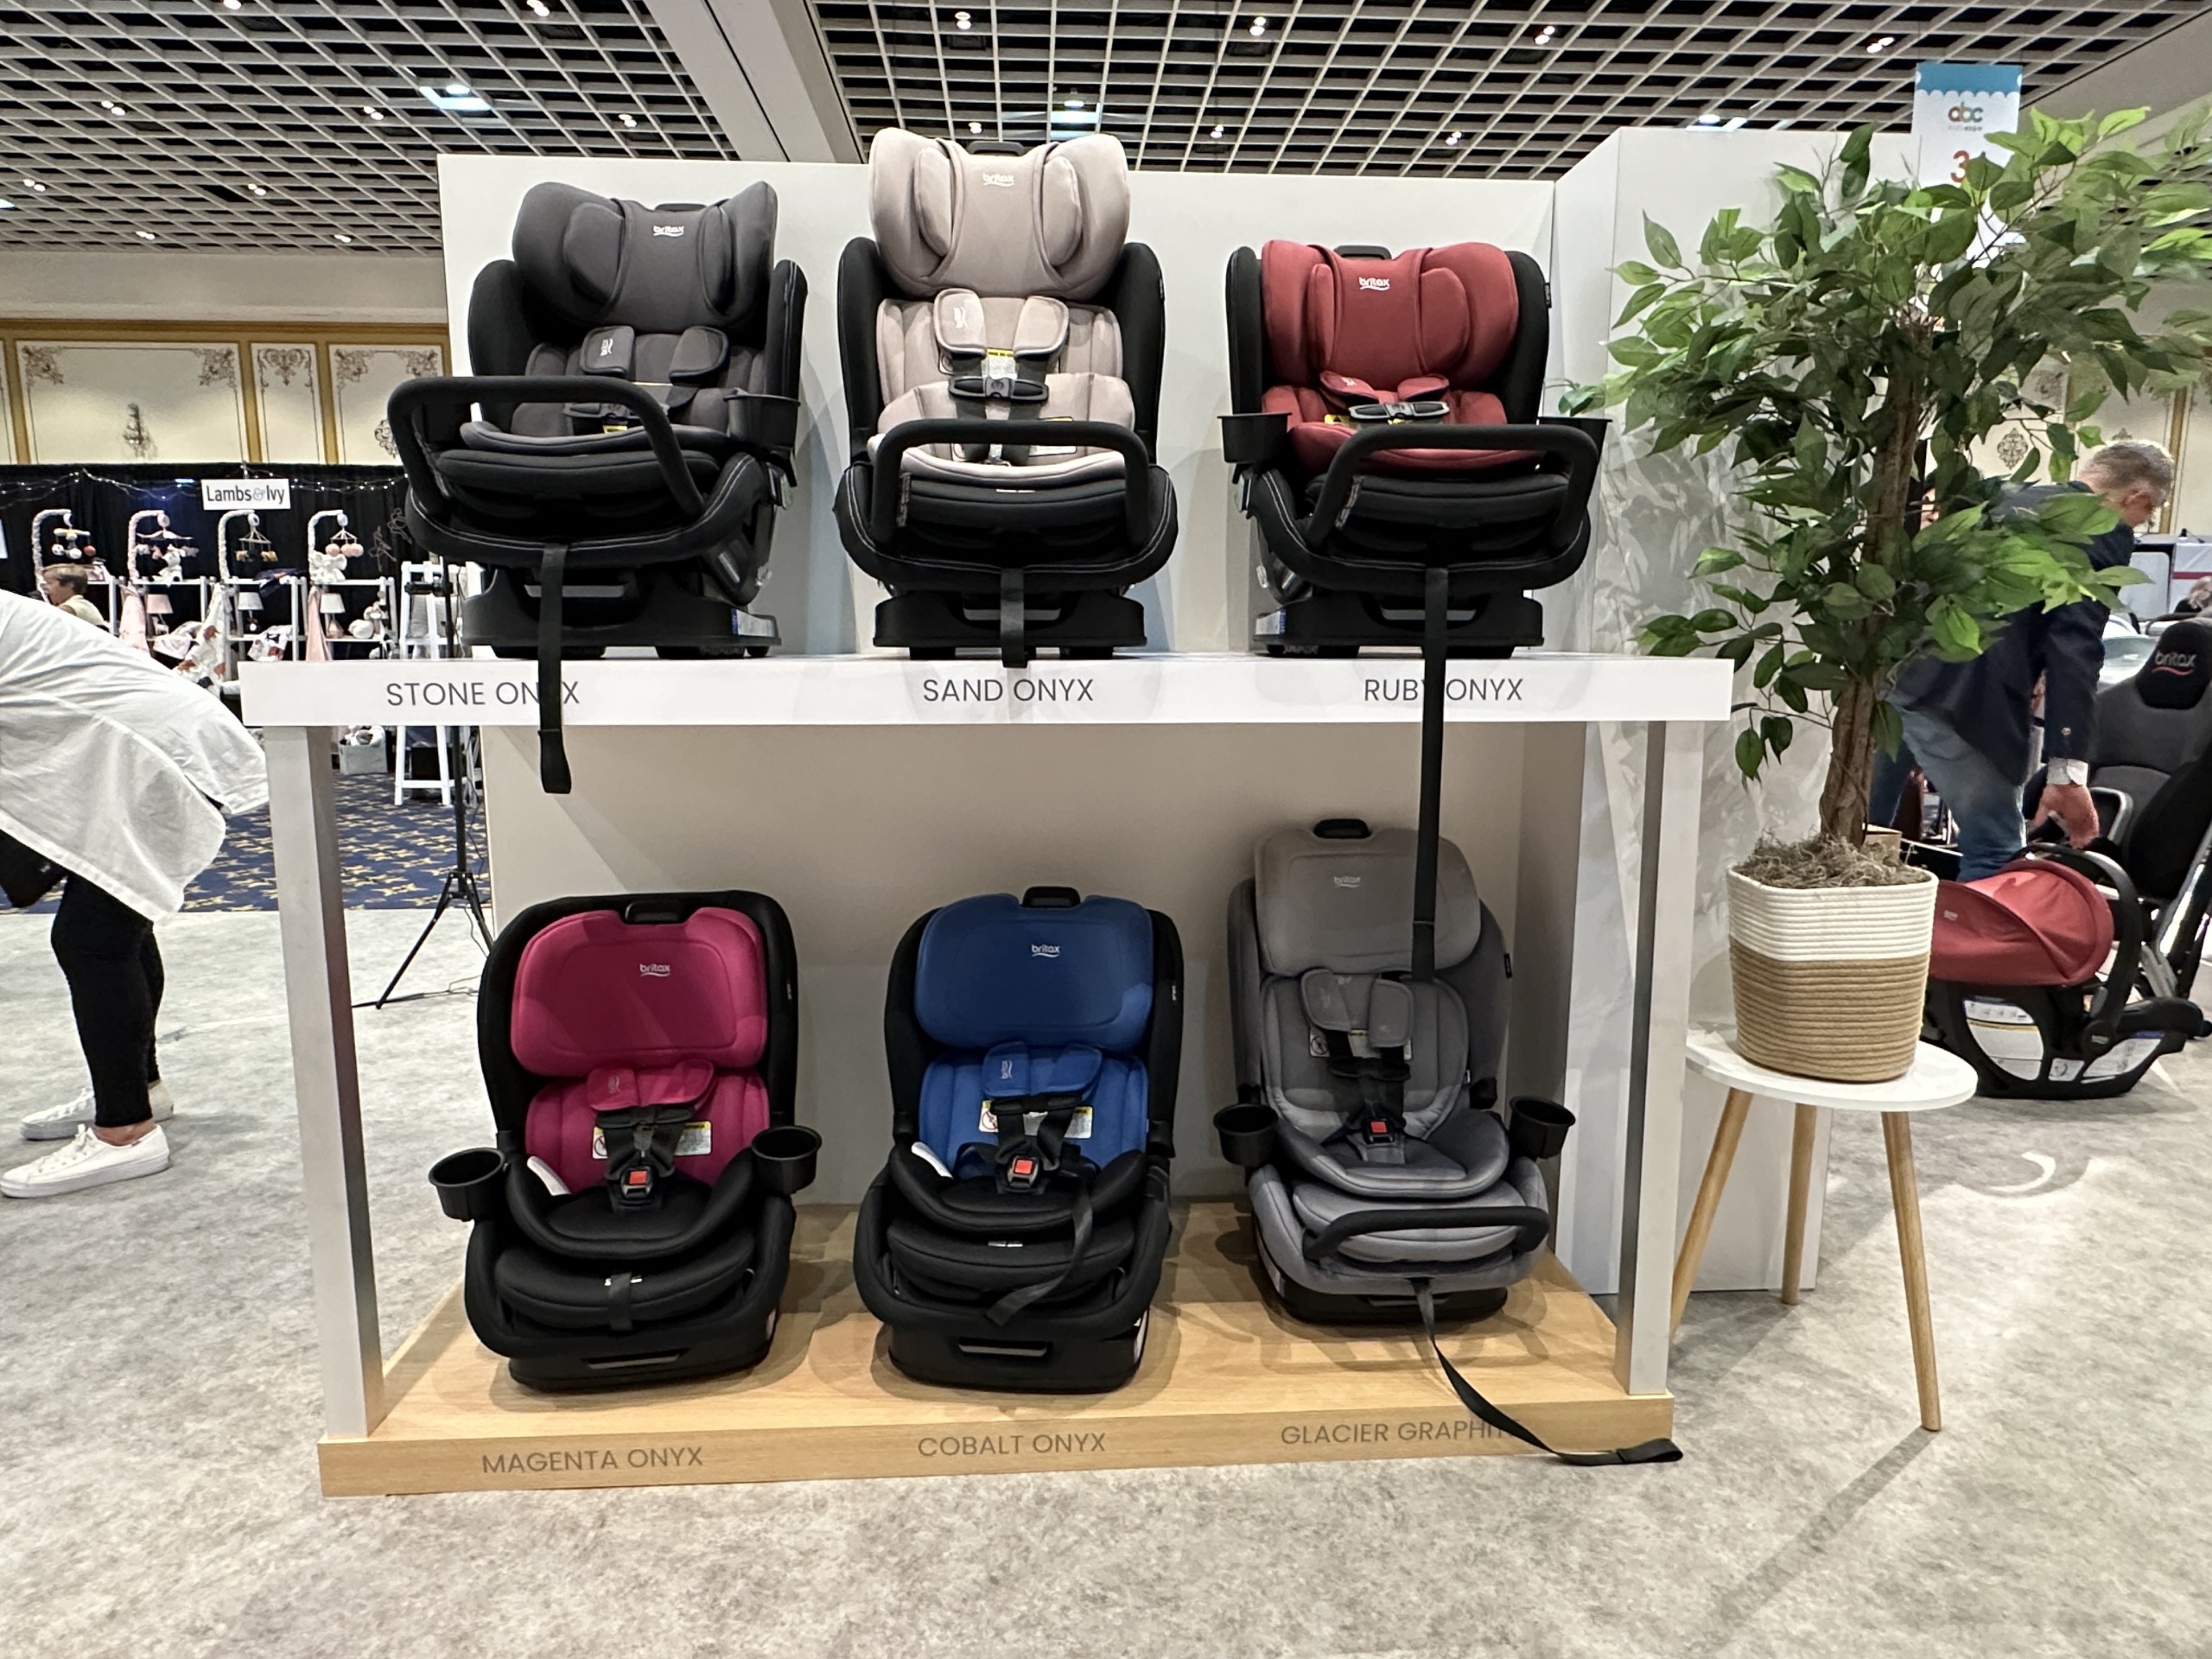 Maxi-Cosi® Introduces Two Innovative New Car Seats Live from ABC Kids Expo